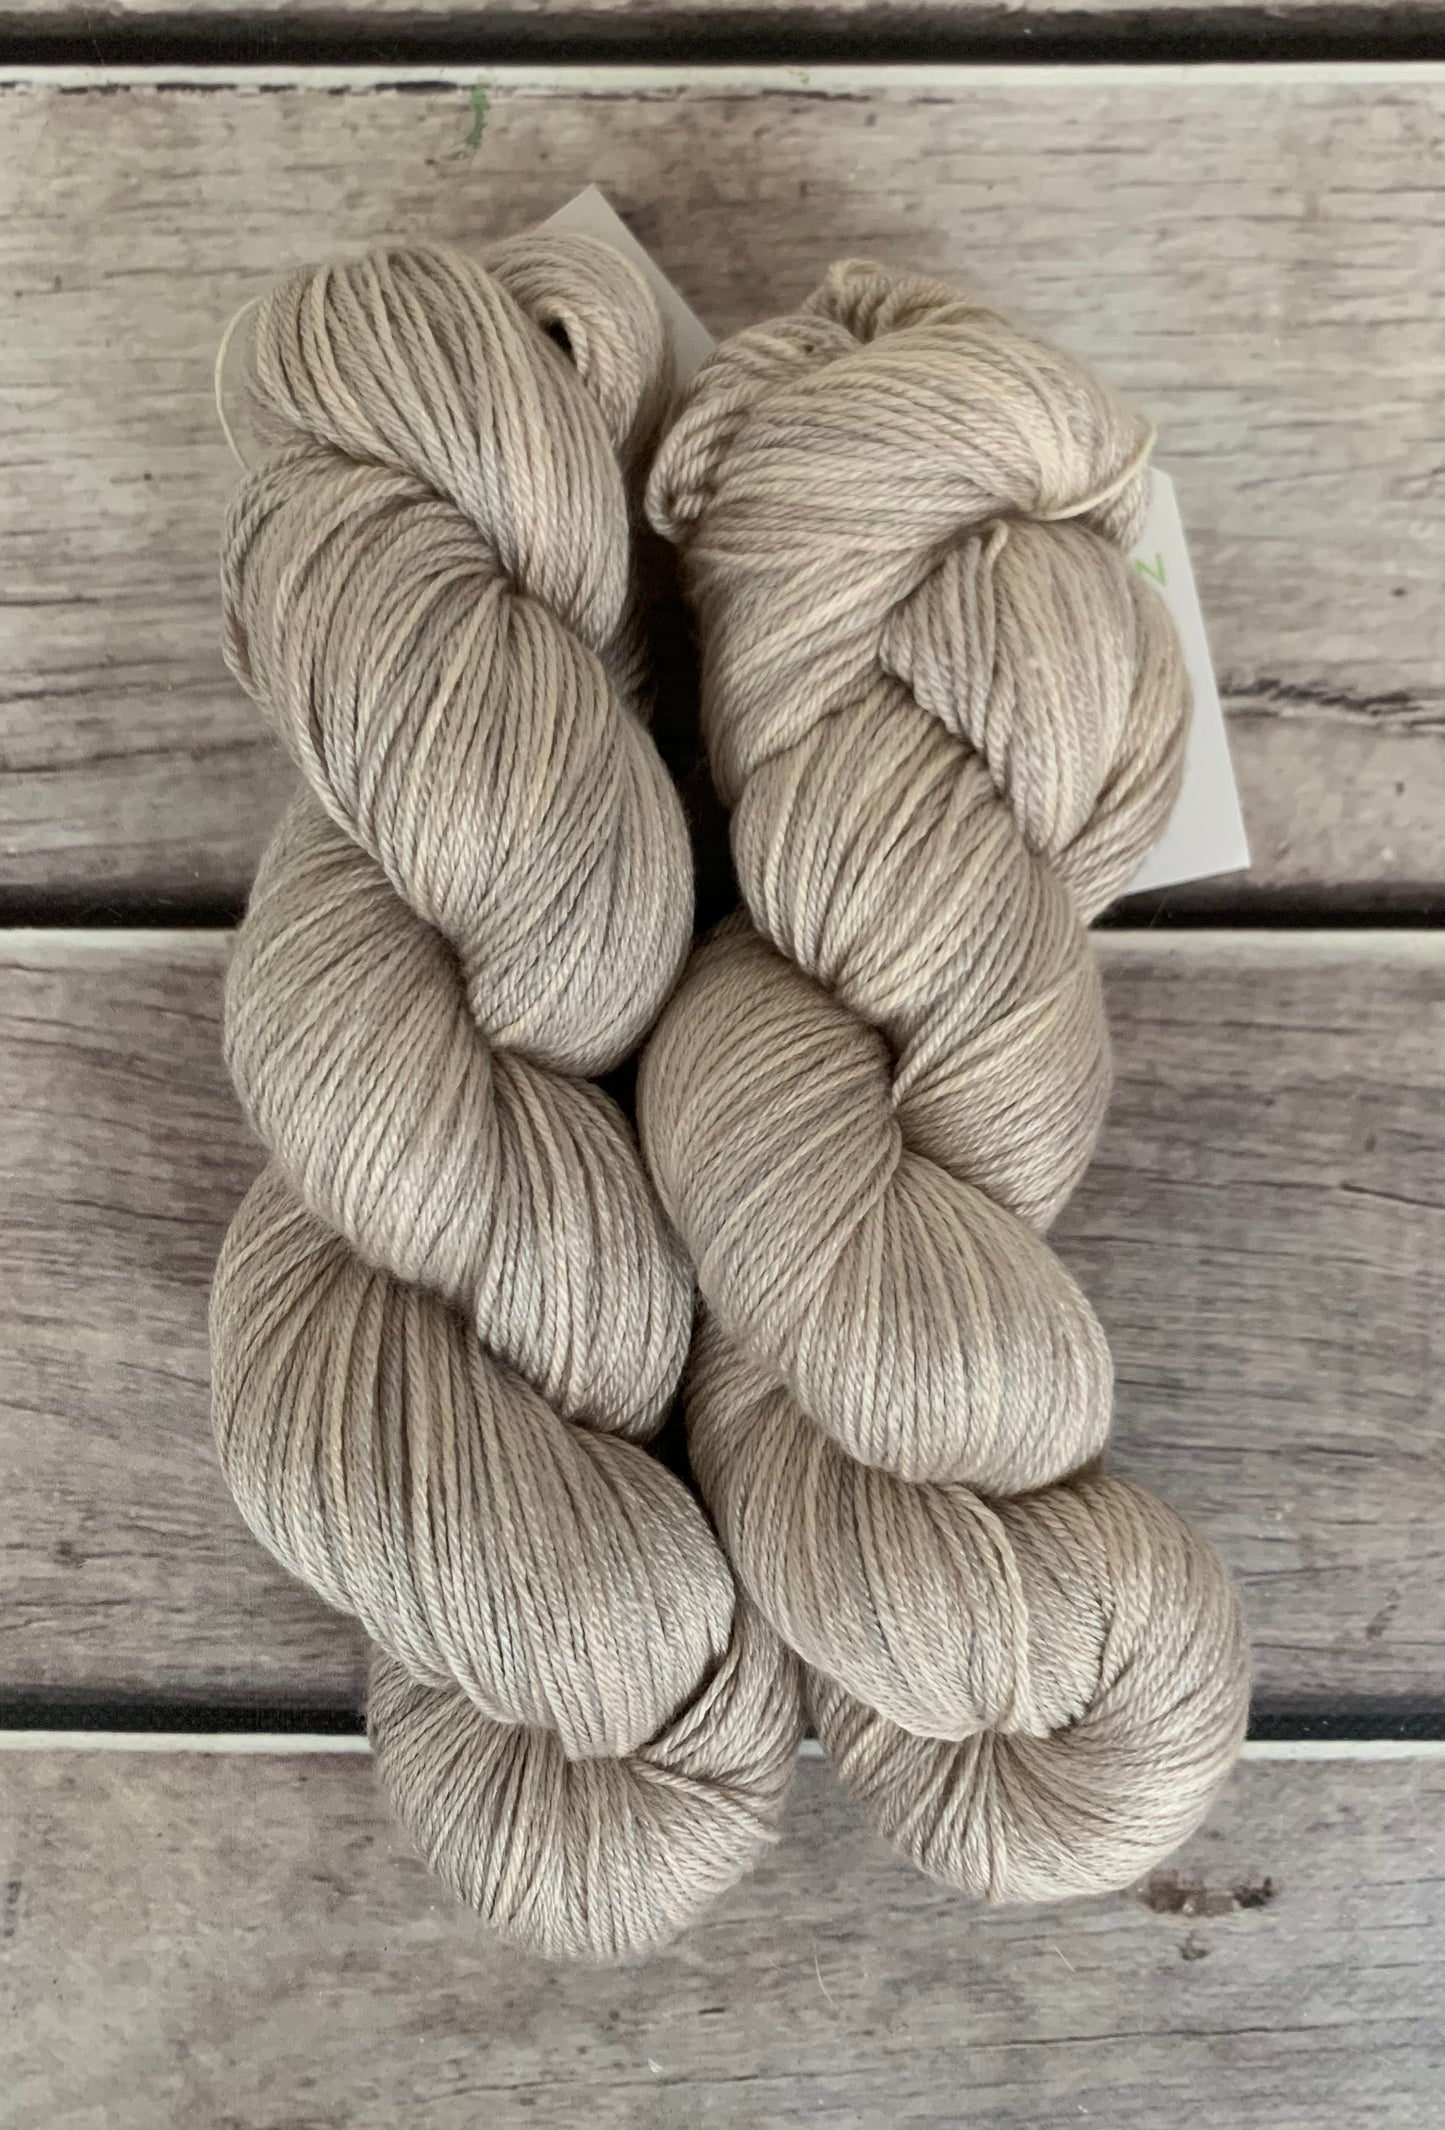 Oysters on the Bay - 4ply/fingering - silk and merino - Jasmin 4